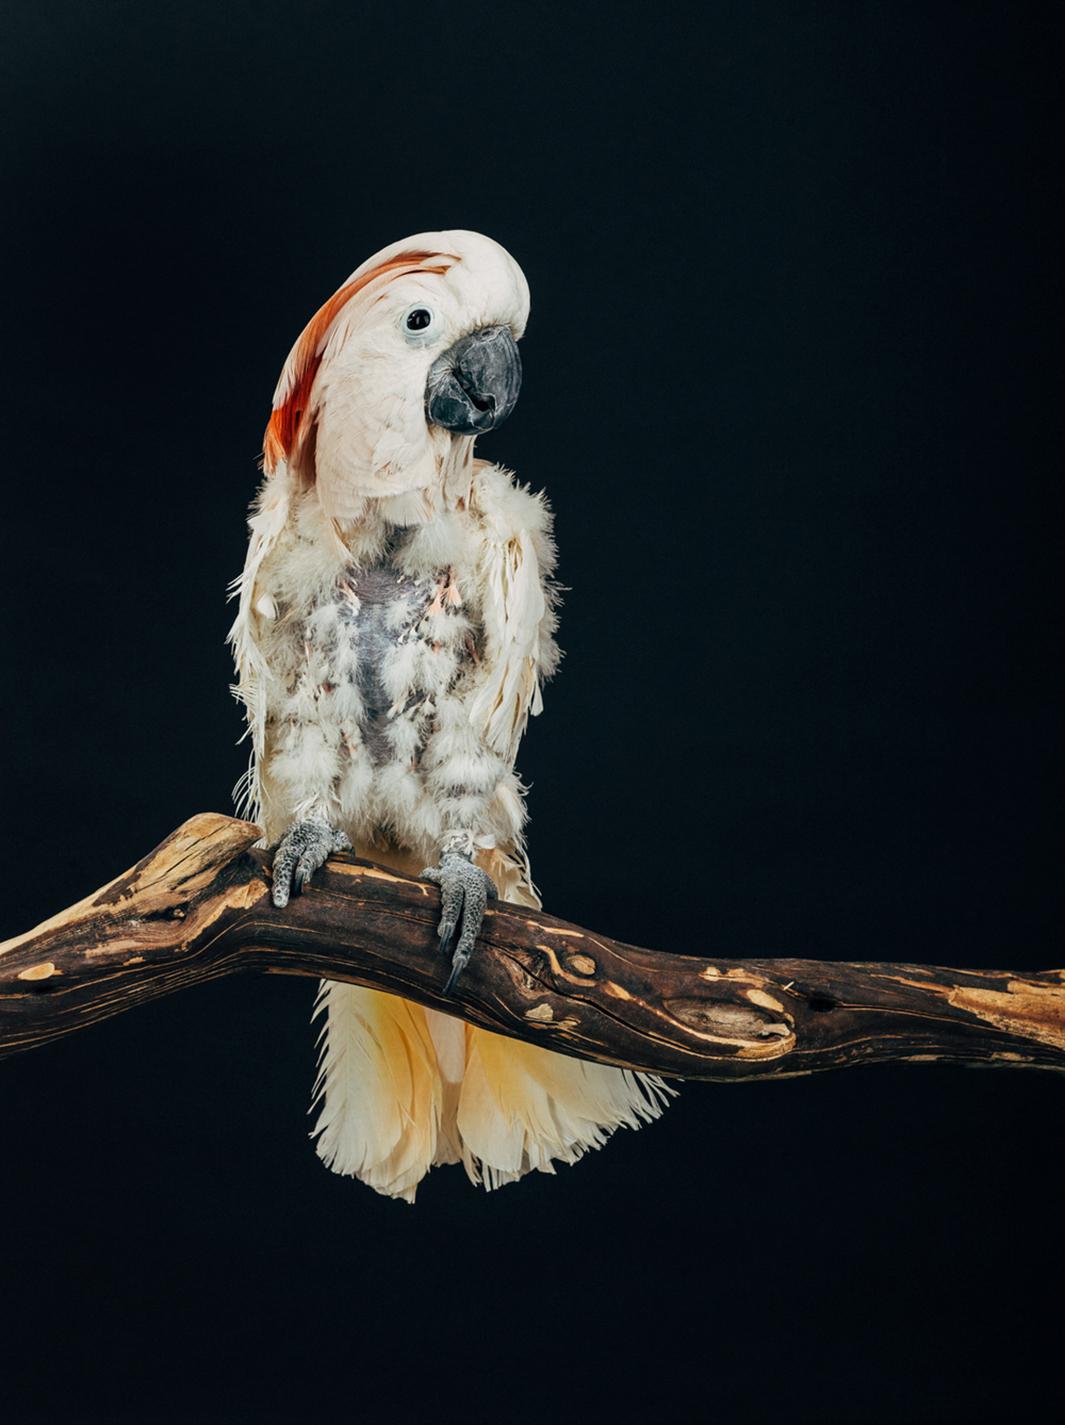 of sanctuaries a of Earthbound portraits sheltered Regueiro: in exotic is birds series Oliver